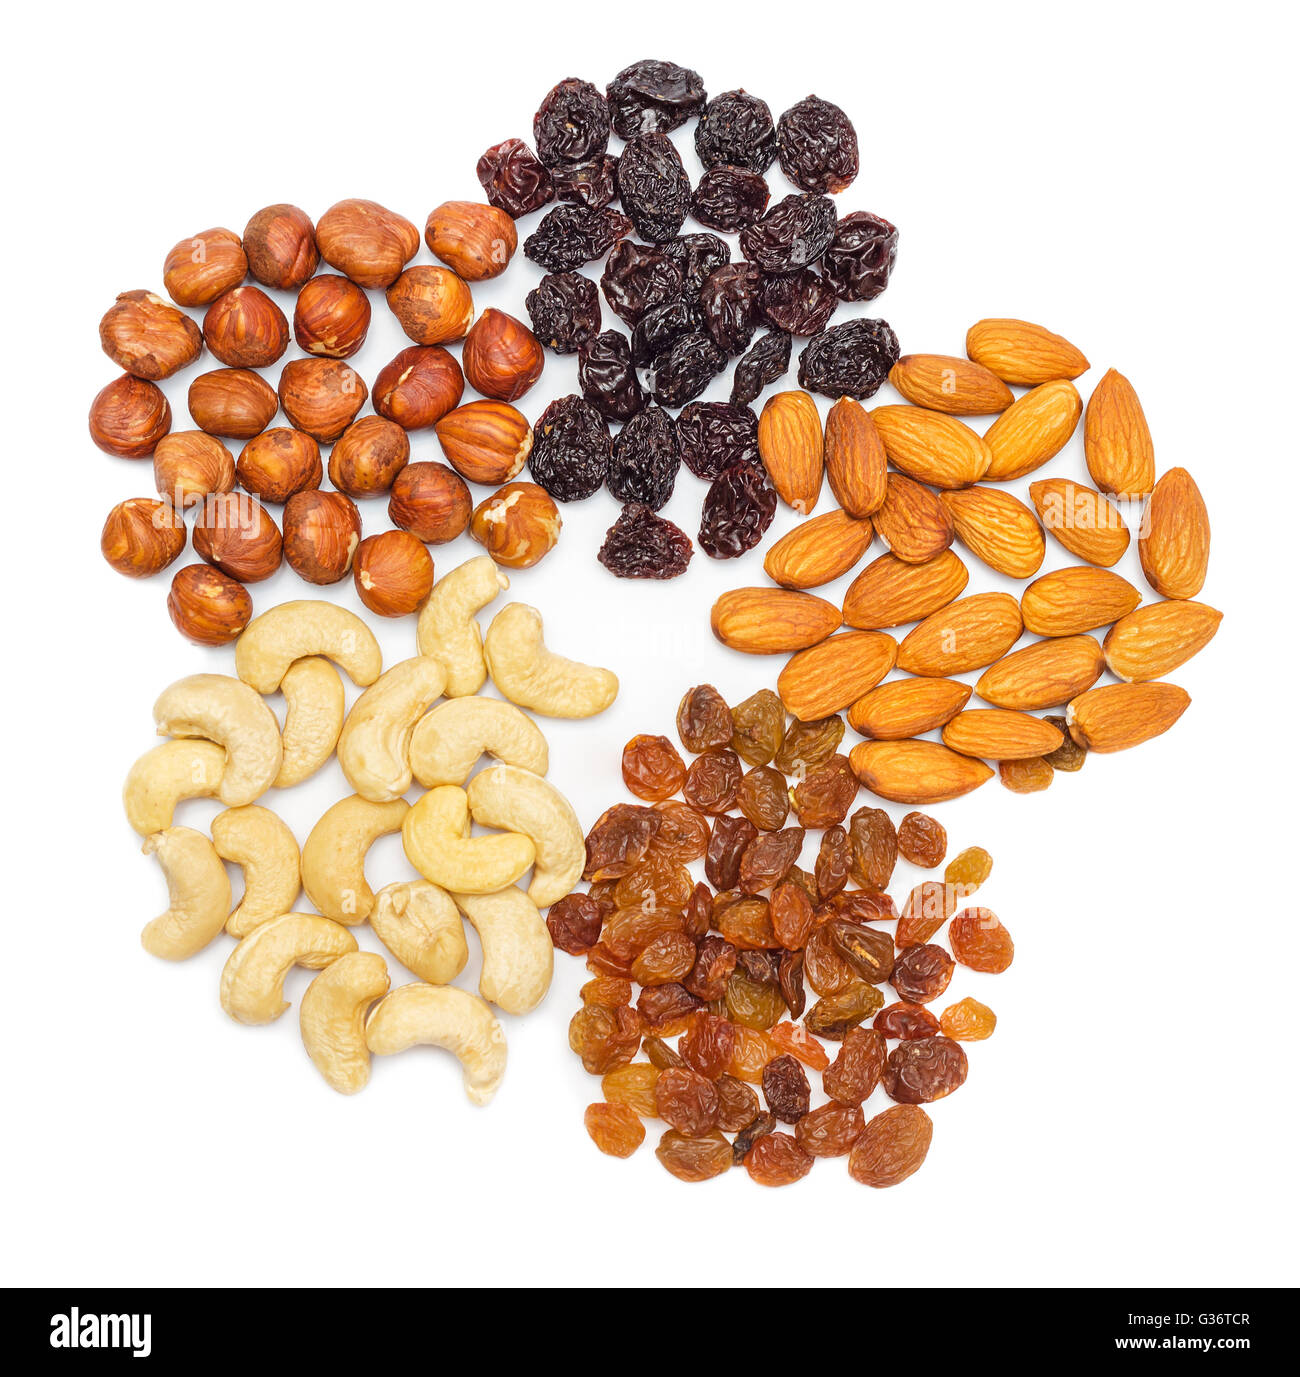 Mixed nuts and dry fruits isolated on white background Stock Photo